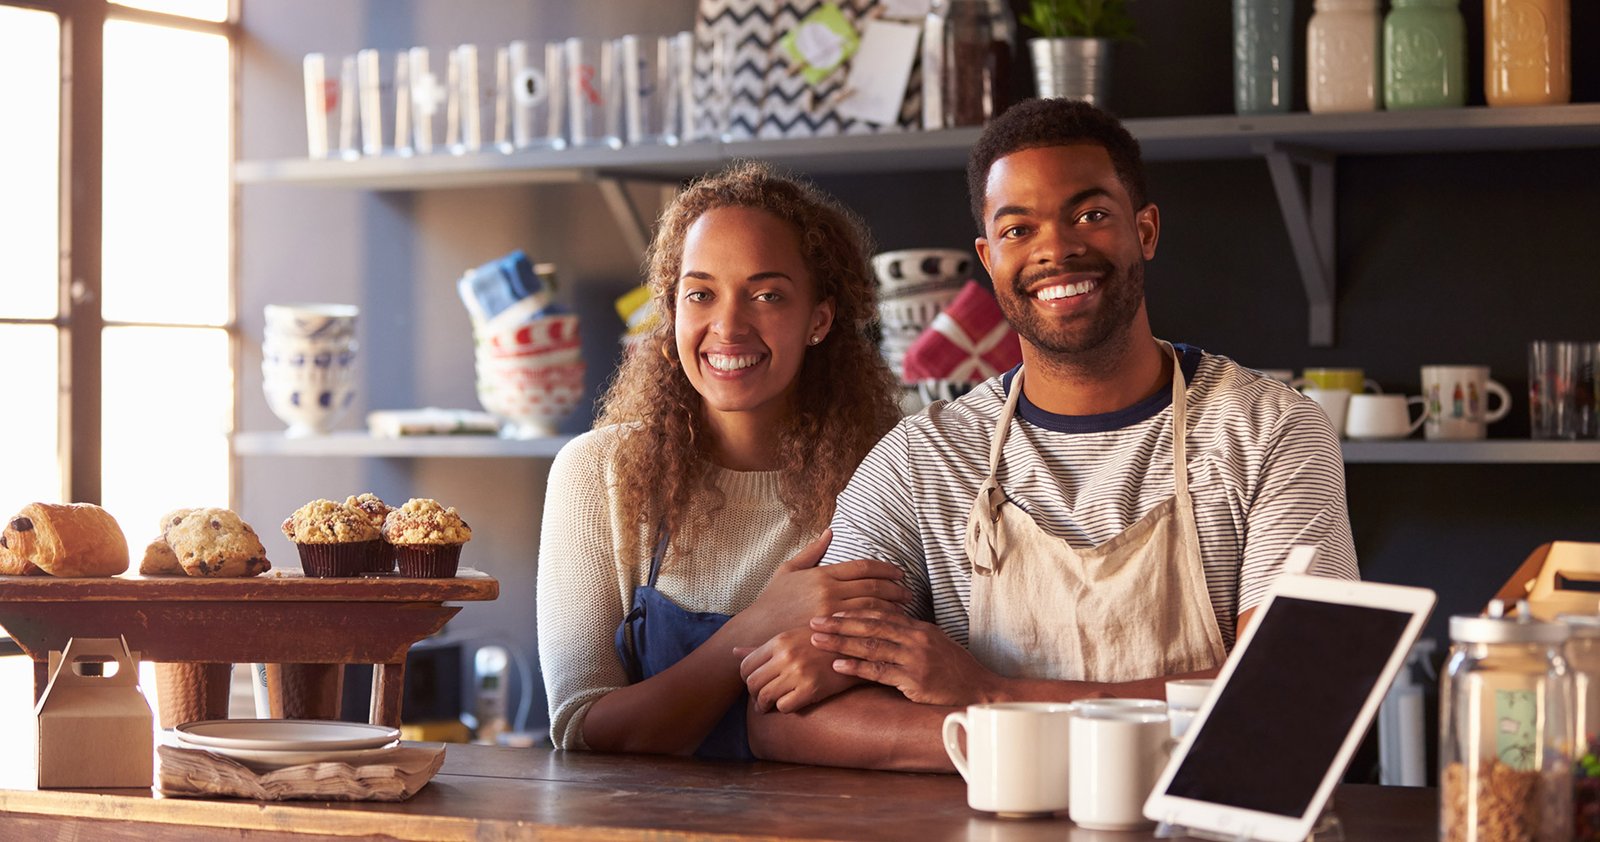 Small Business Saturday: The Vital Role of Small Businesses